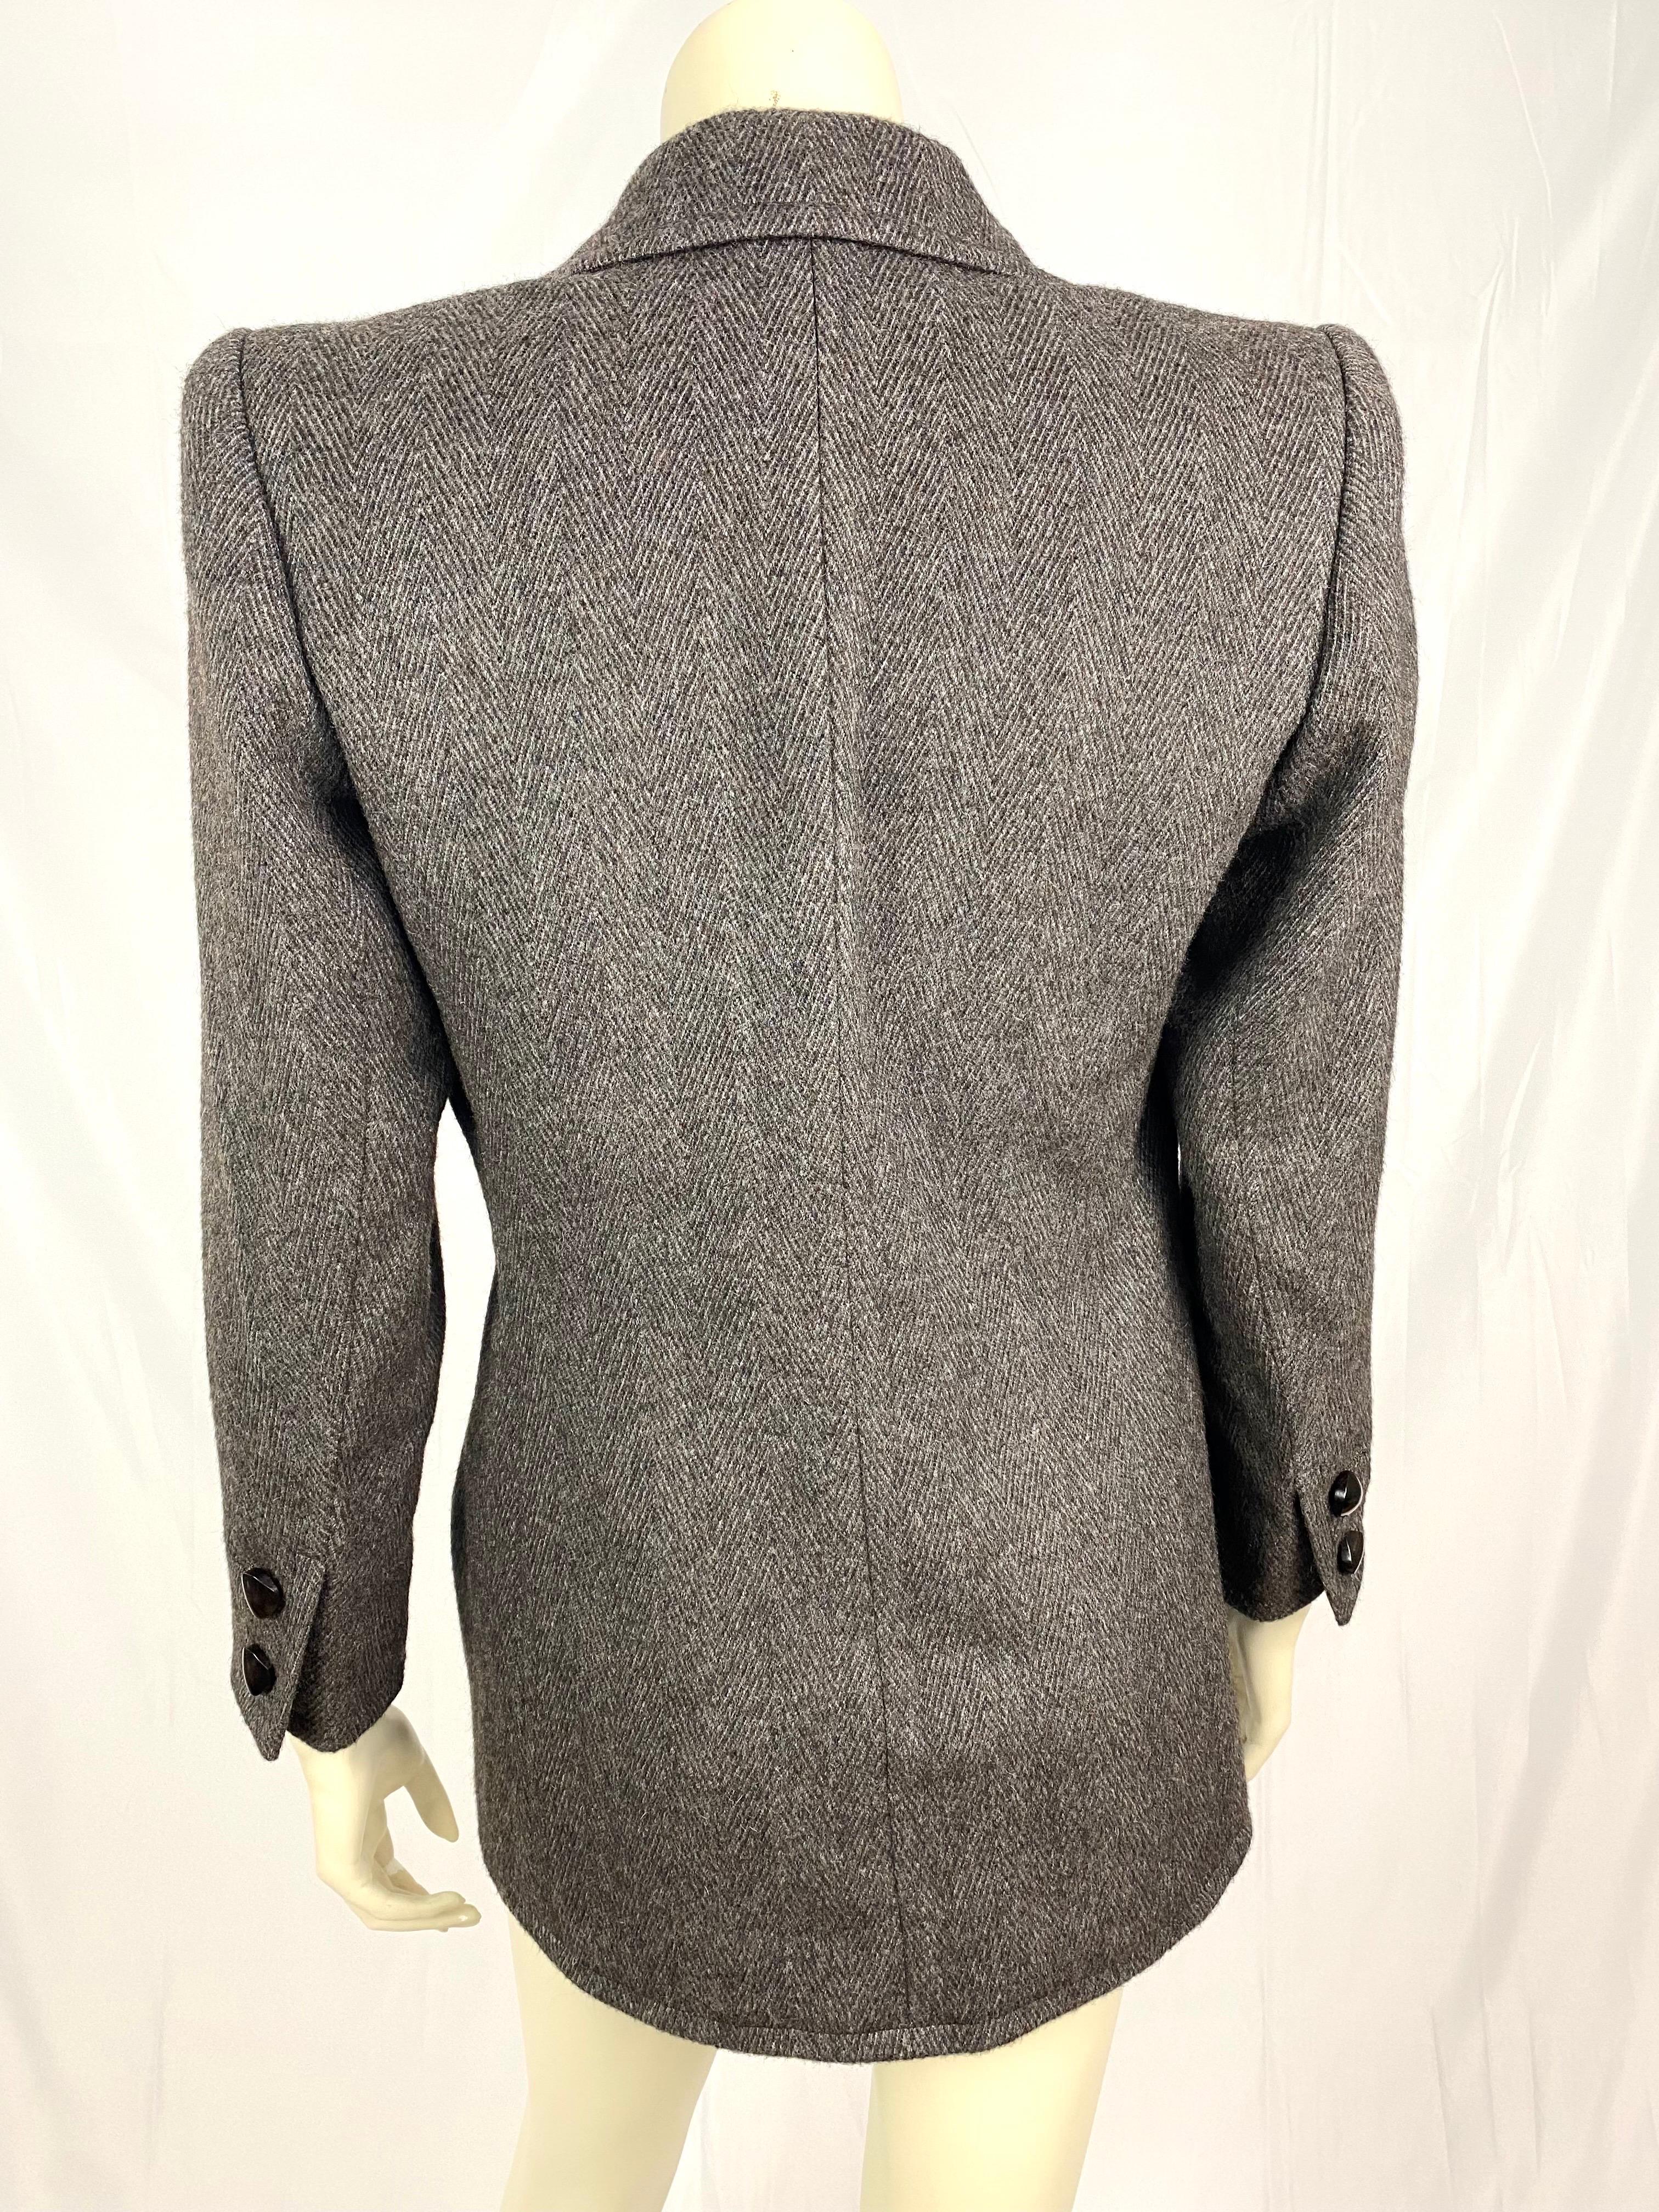 Stunning vintage Yves Saint Laurent Haute Couture numbered blazer.
Structured and very elegant with its slightly pagoda shoulders.
Nicely fitted with an imposing and unique wooden button to close the blazer.
Herringbone in brown/taupe and grey.
The